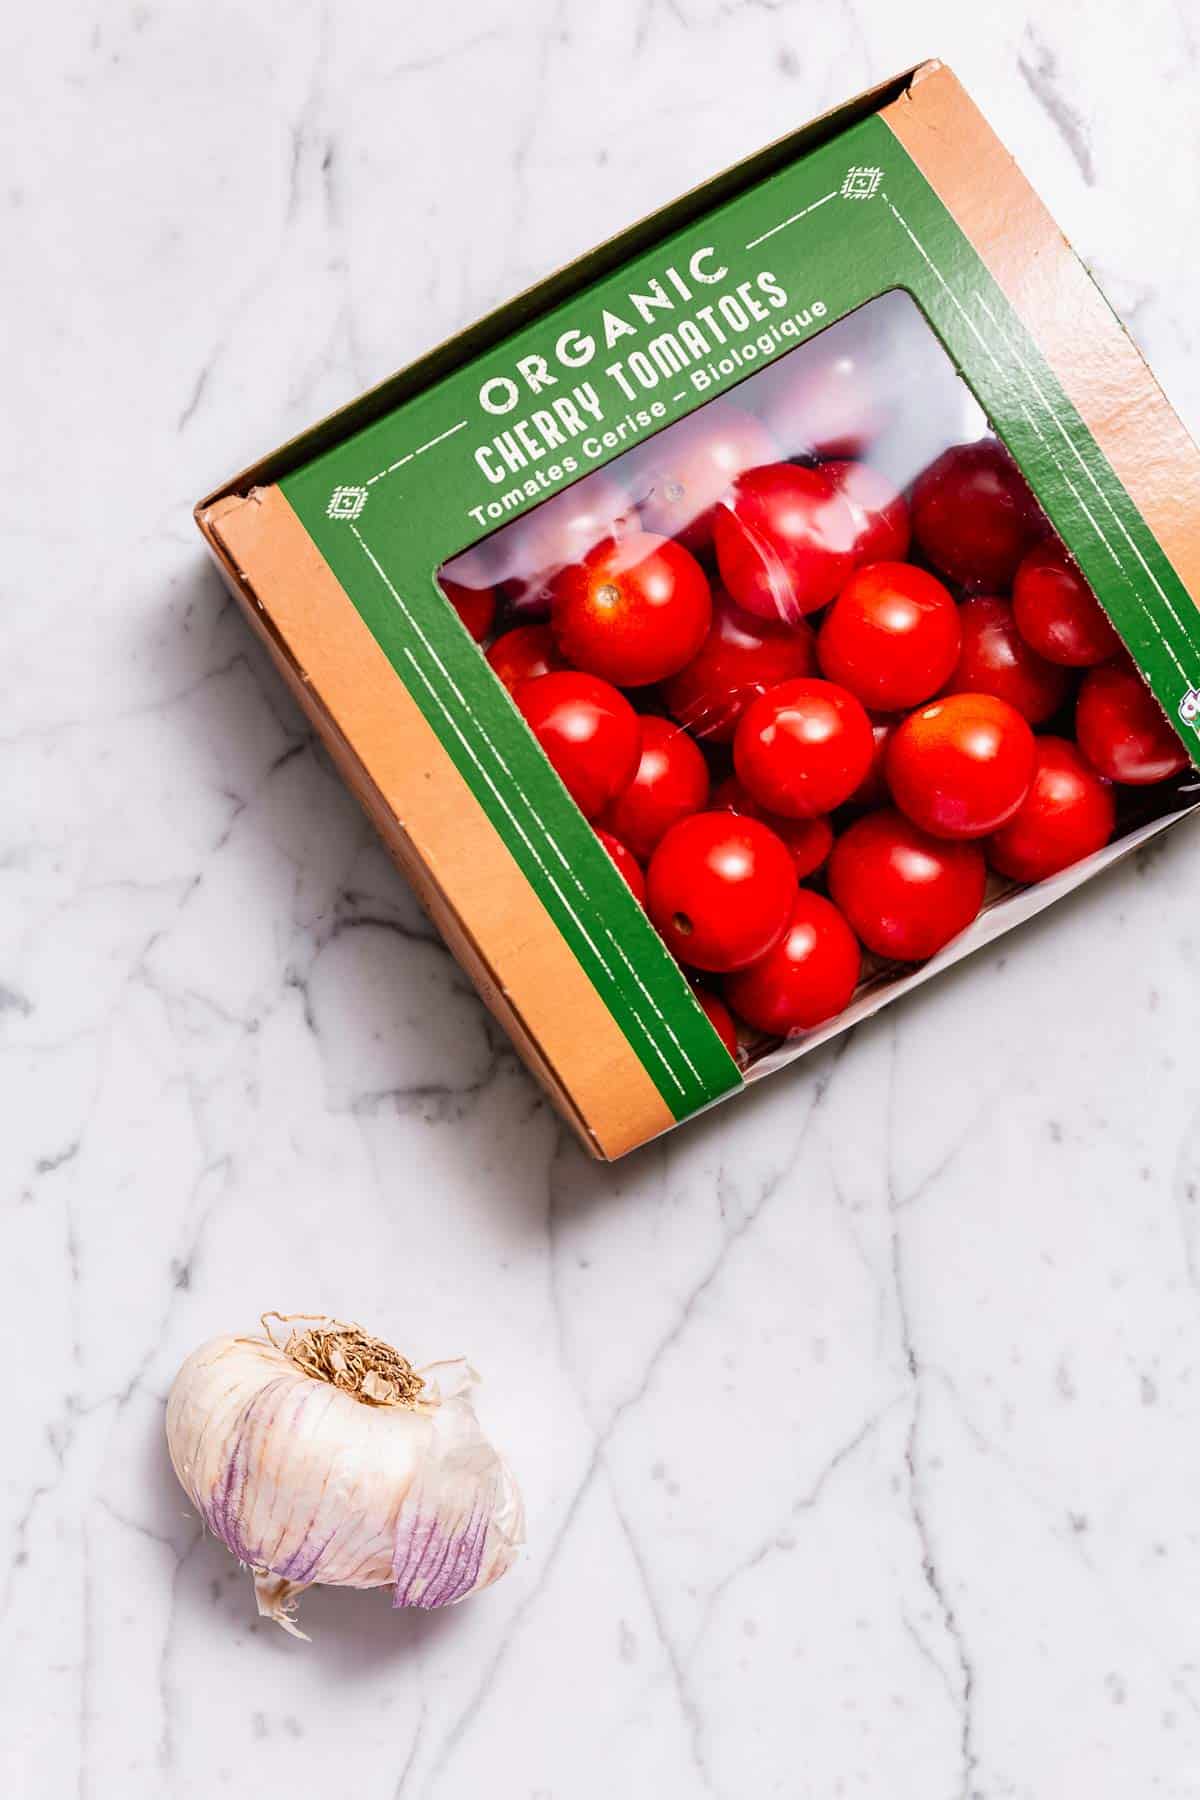 A pint box of cherry tomatoes and a head of garlic on a marble surface.